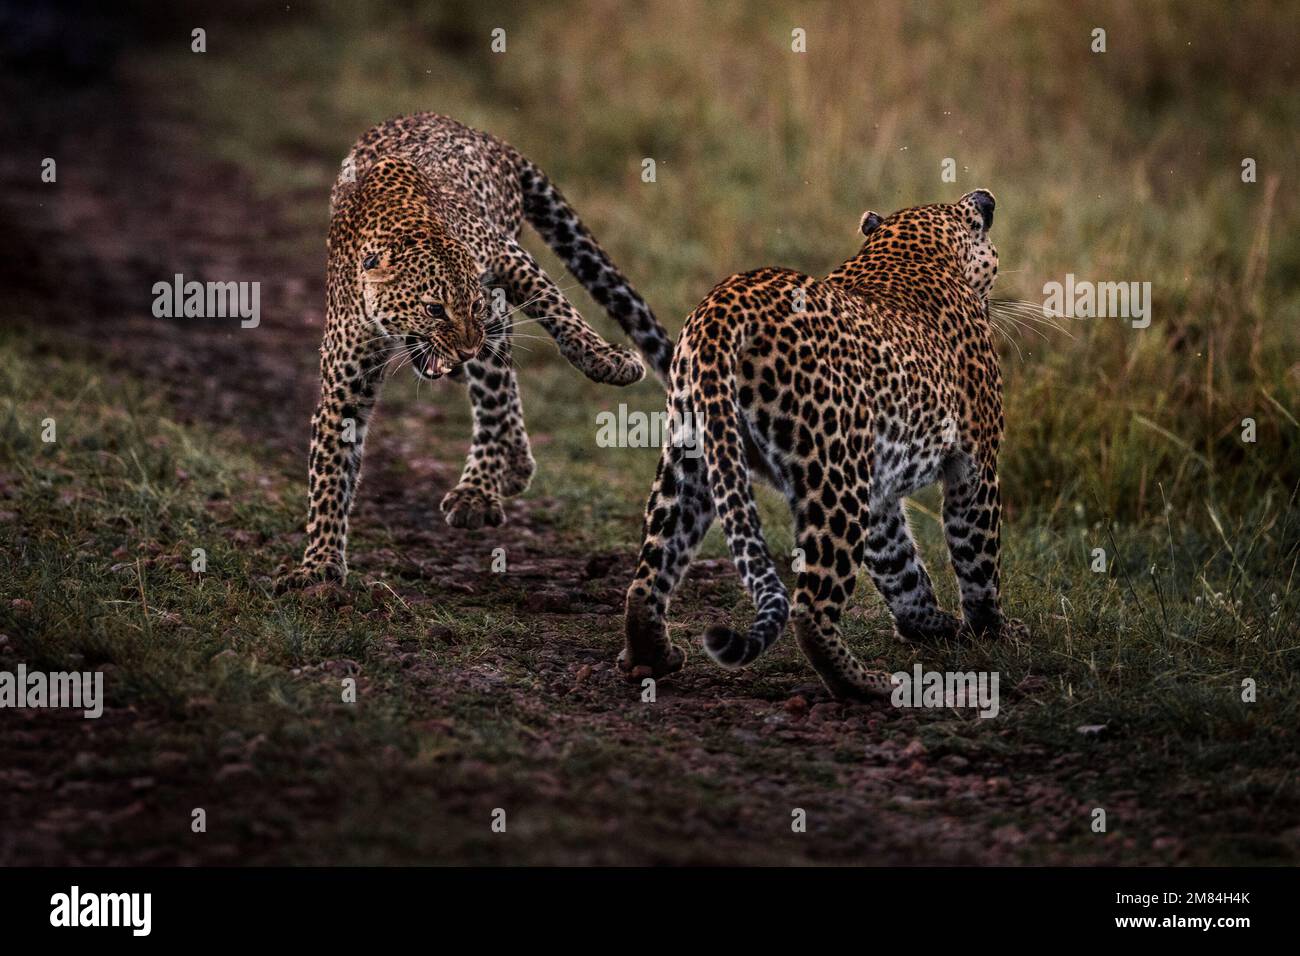 Hissy fit. Kenya: IF YOU thought you had a problem with boomerang children unwilling to fly the nest spare a thought for this mother leopard who had t Stock Photo